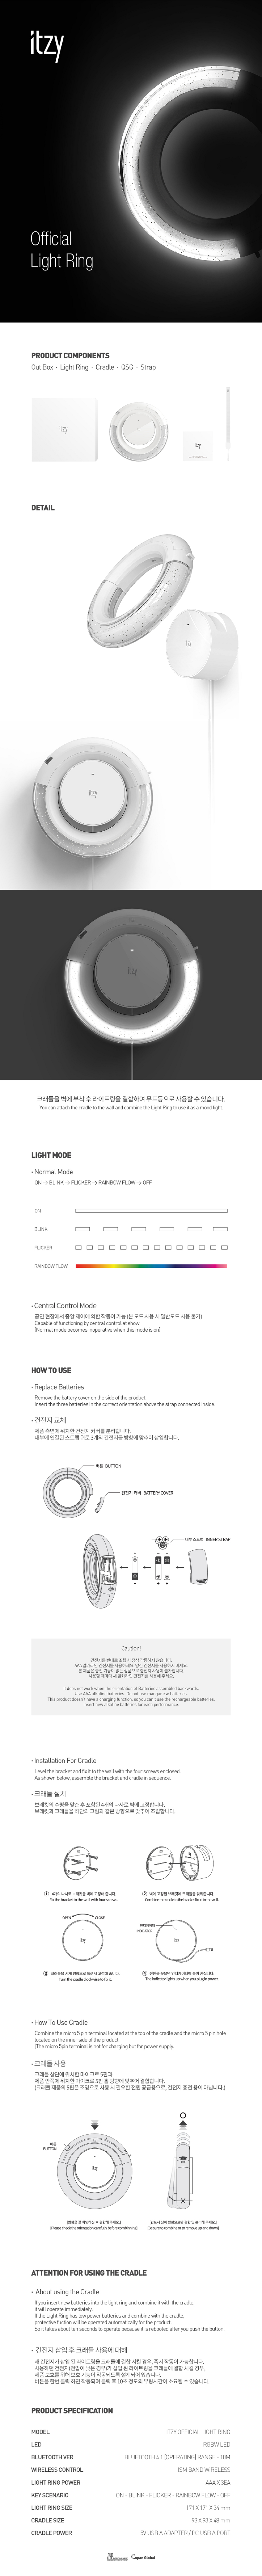 Itzy Official Light Ring contents